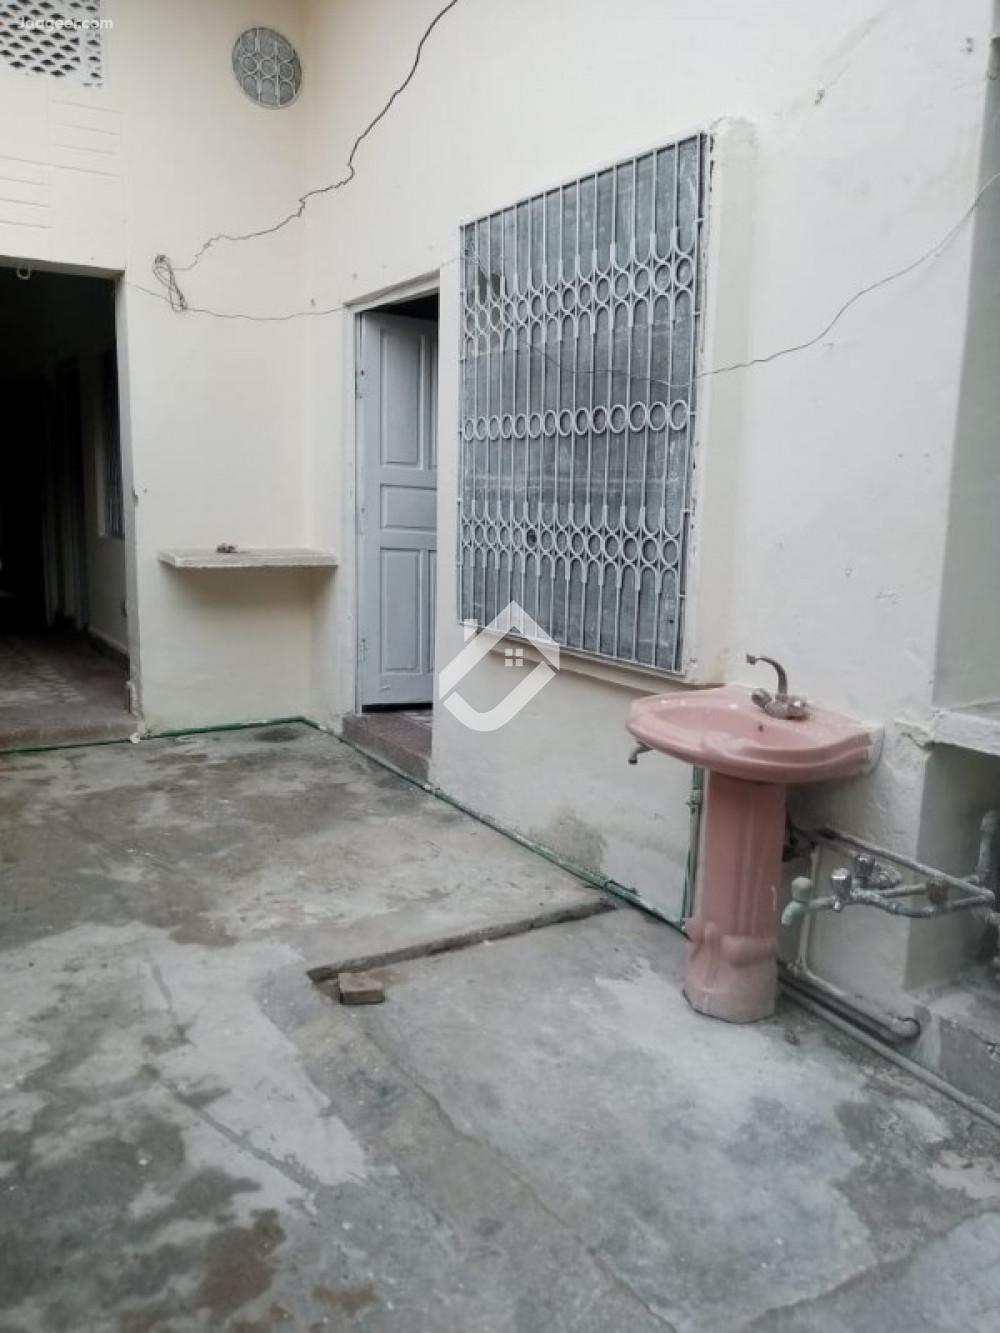 View  3.5 Marla House For Rent In Old Satellite Town Block D in Old Satellite Town, Sargodha